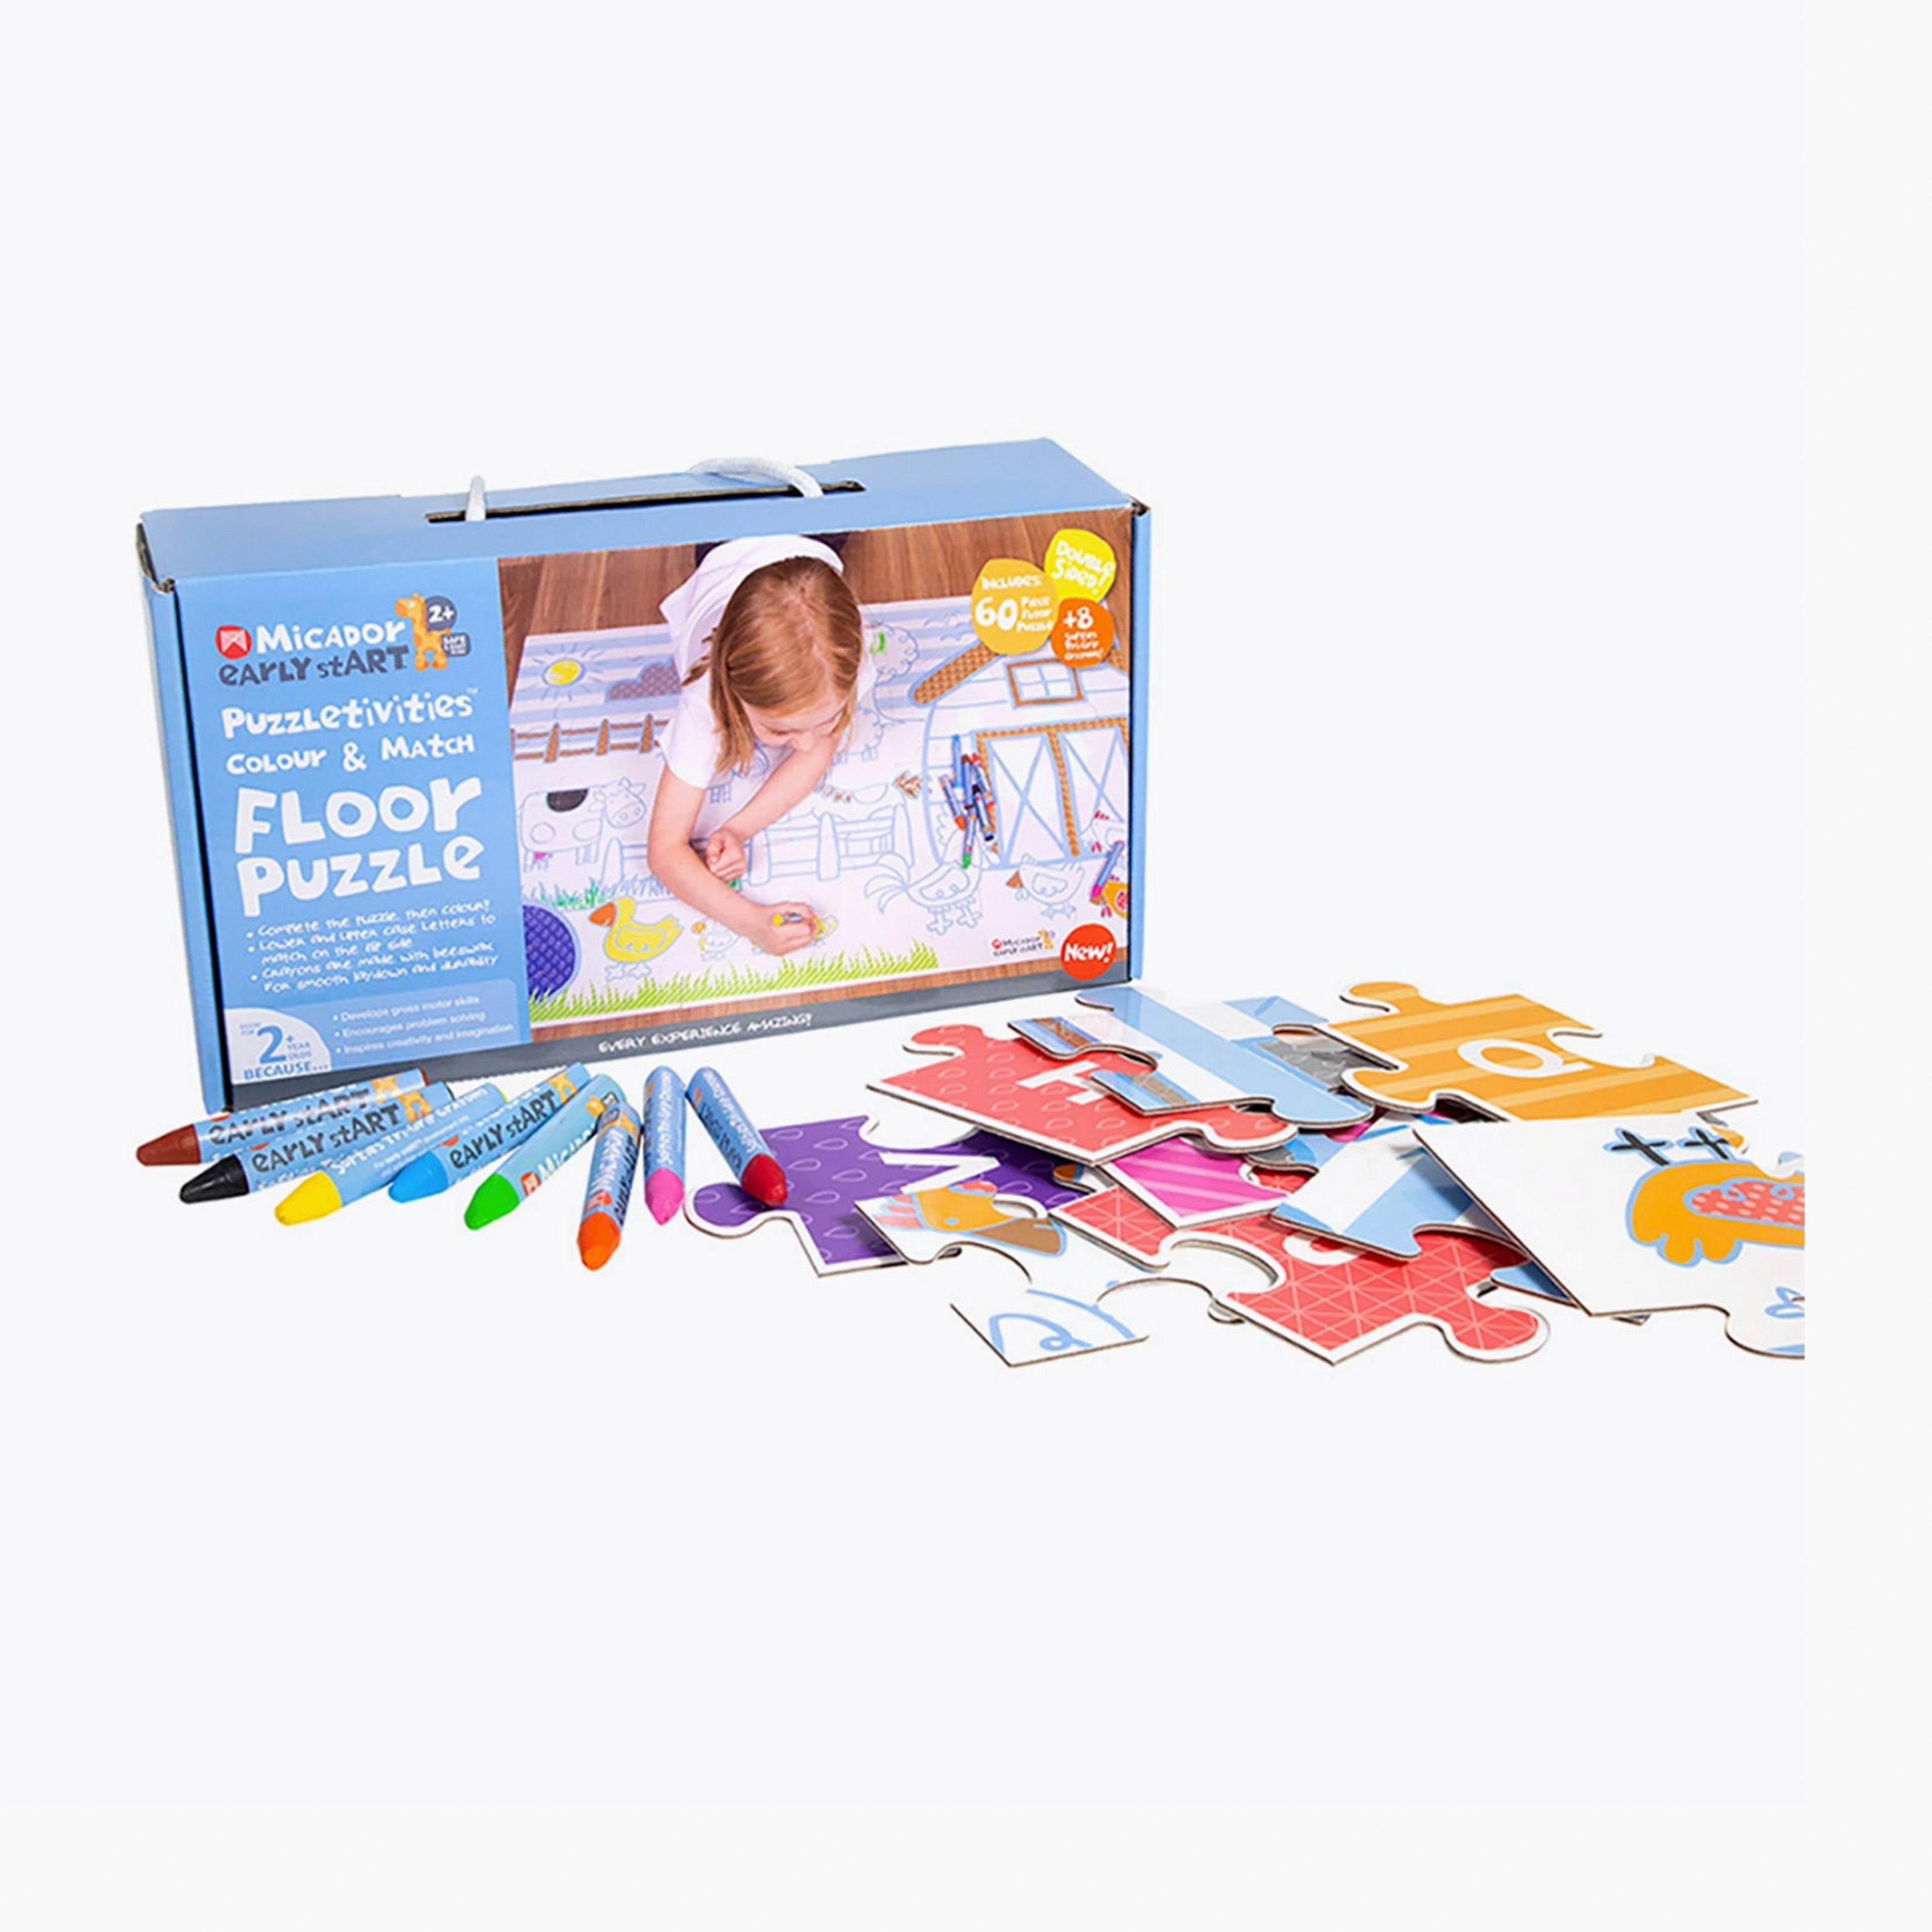 An image of Kids Puzzles - Crayons & Puzzle Set - Puzzle | Micador